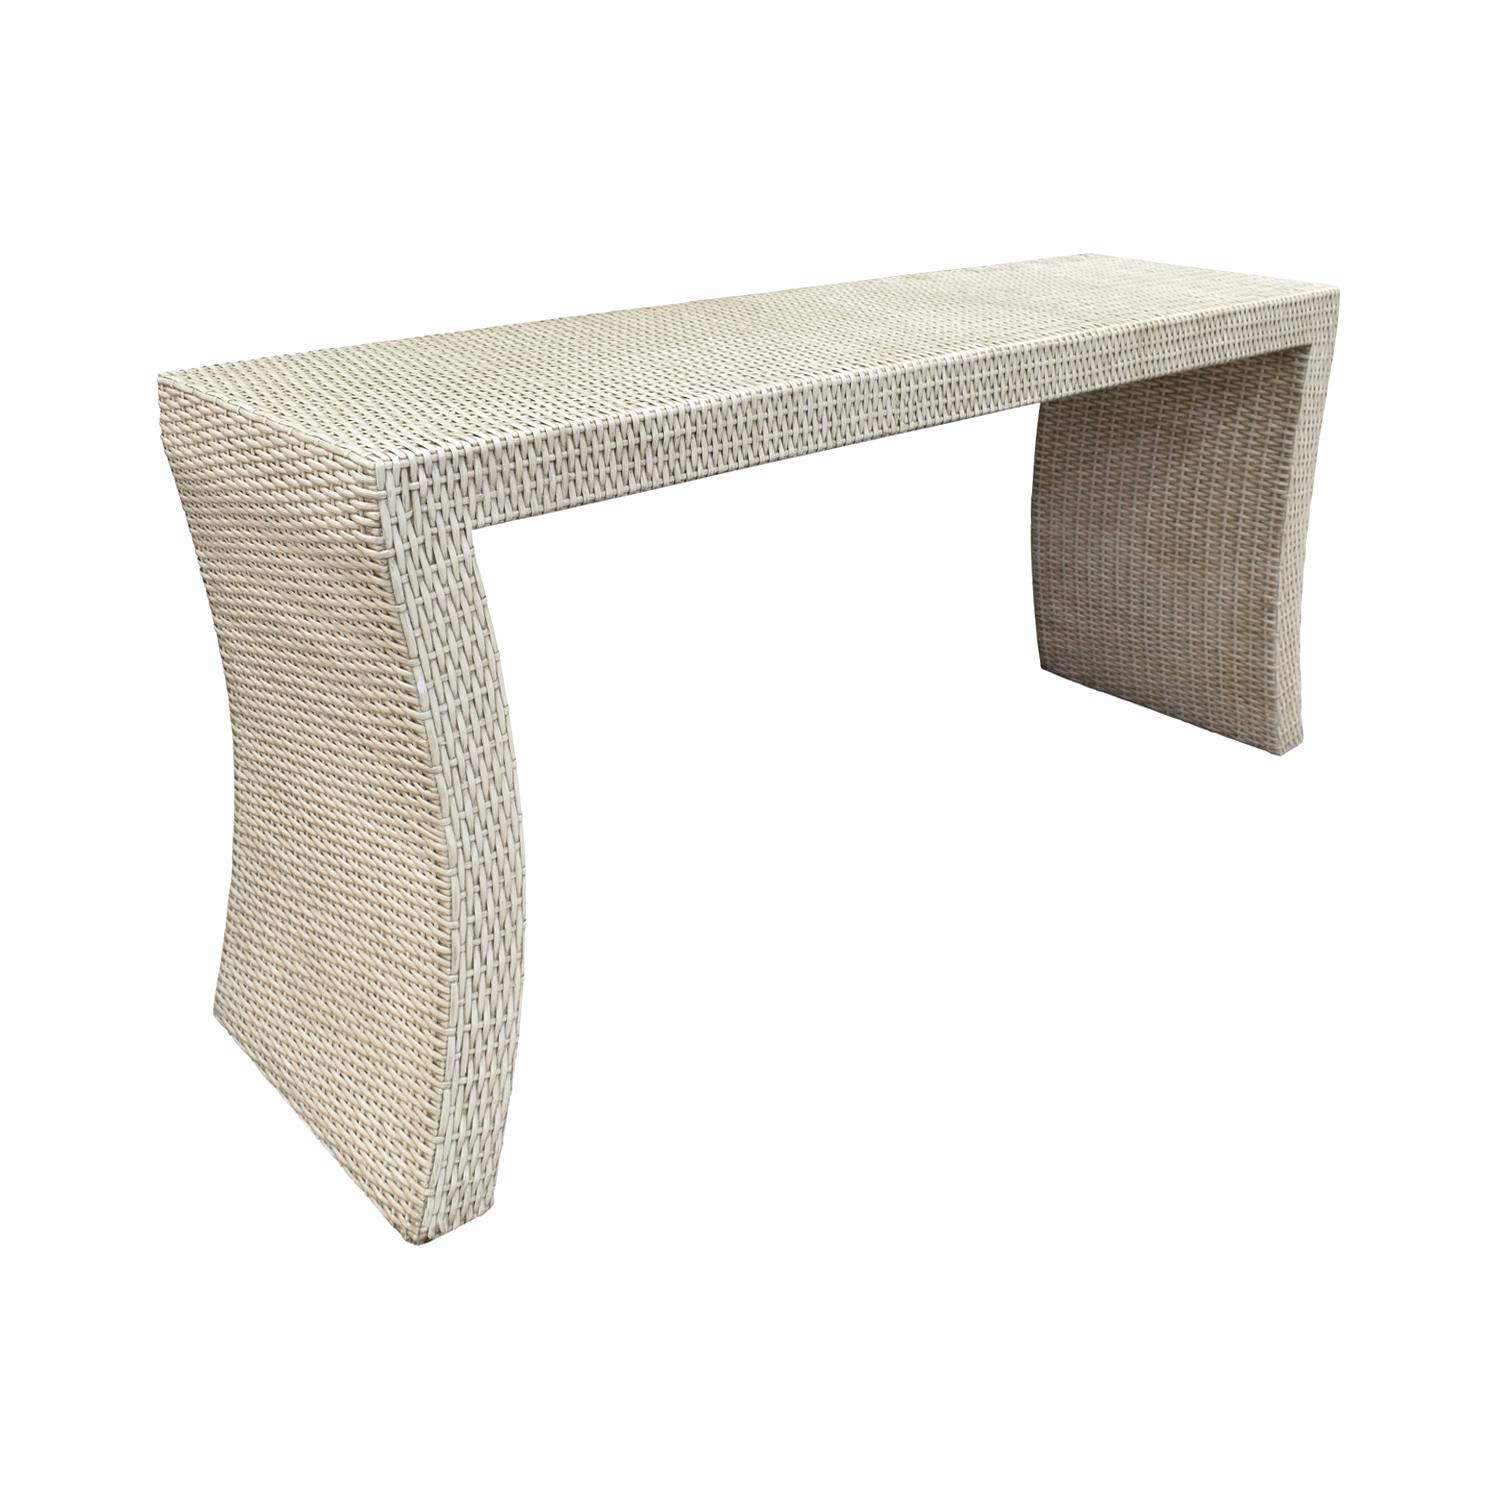 Karl Springer style console table in white wicker with curving sides, American, 1970s. This console is very chic.